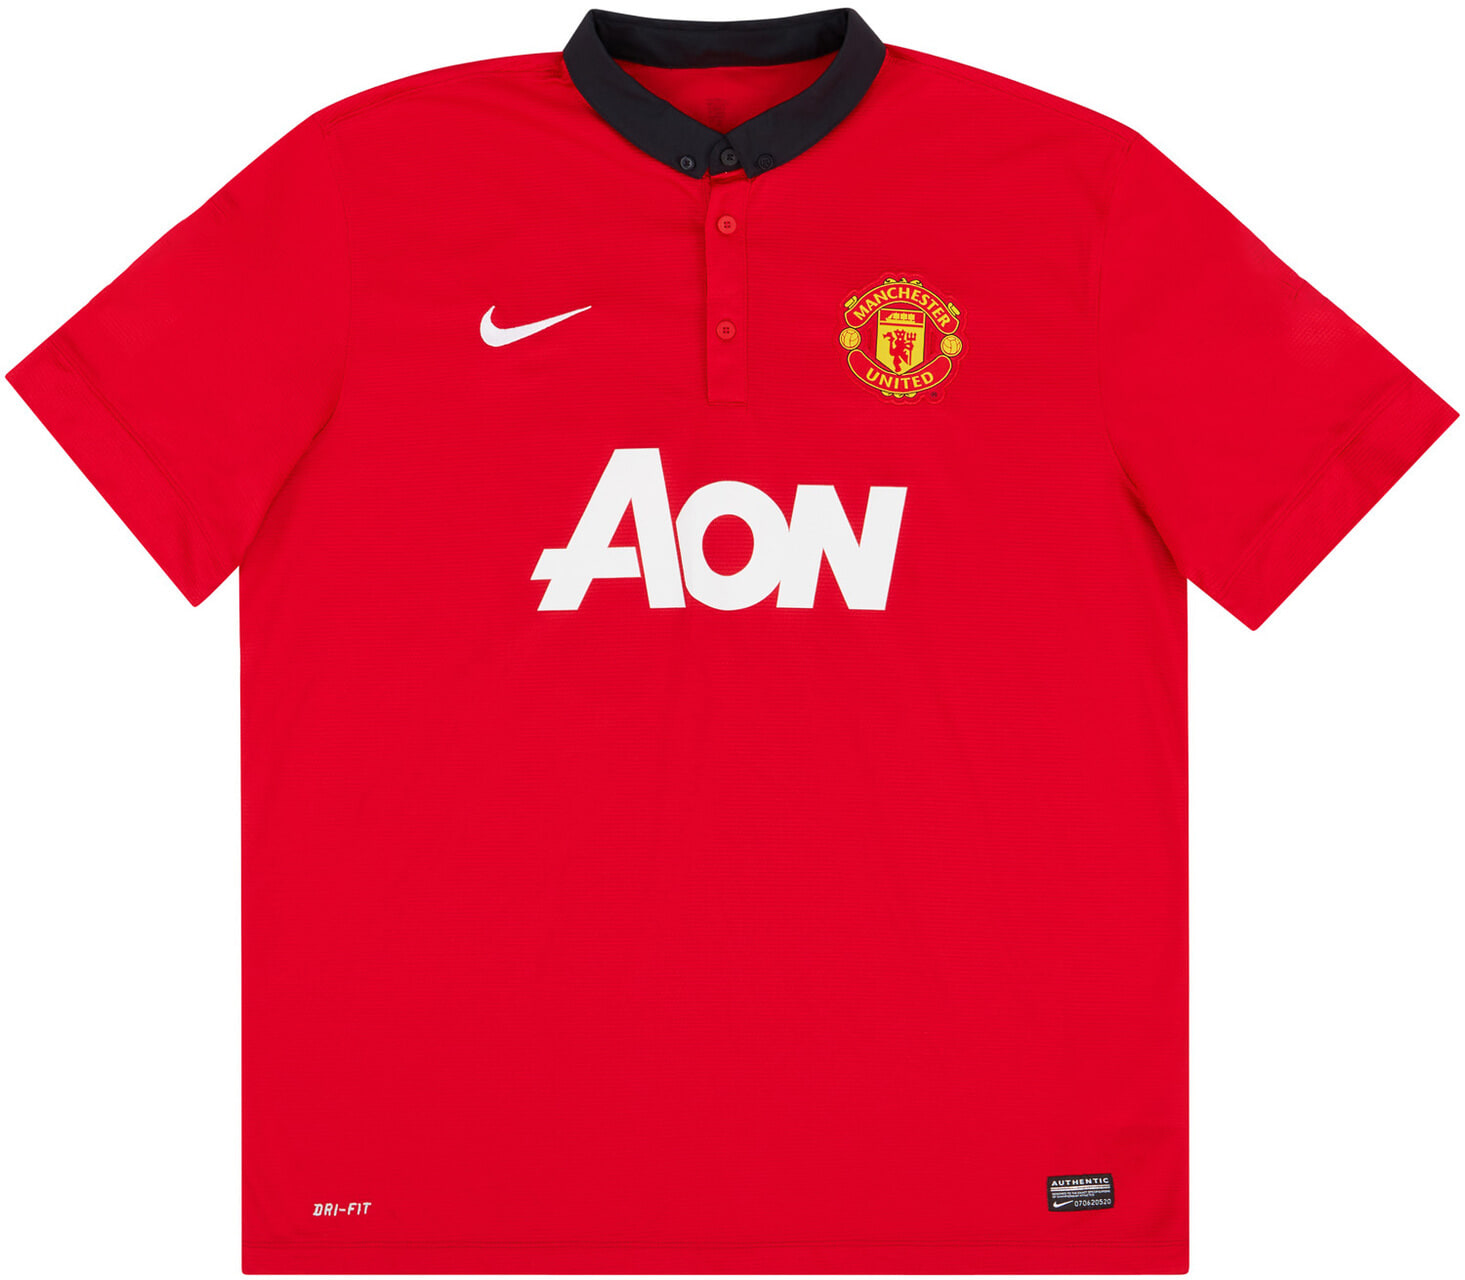 2013-14 Manchester United Home Shirt - 7/10 -